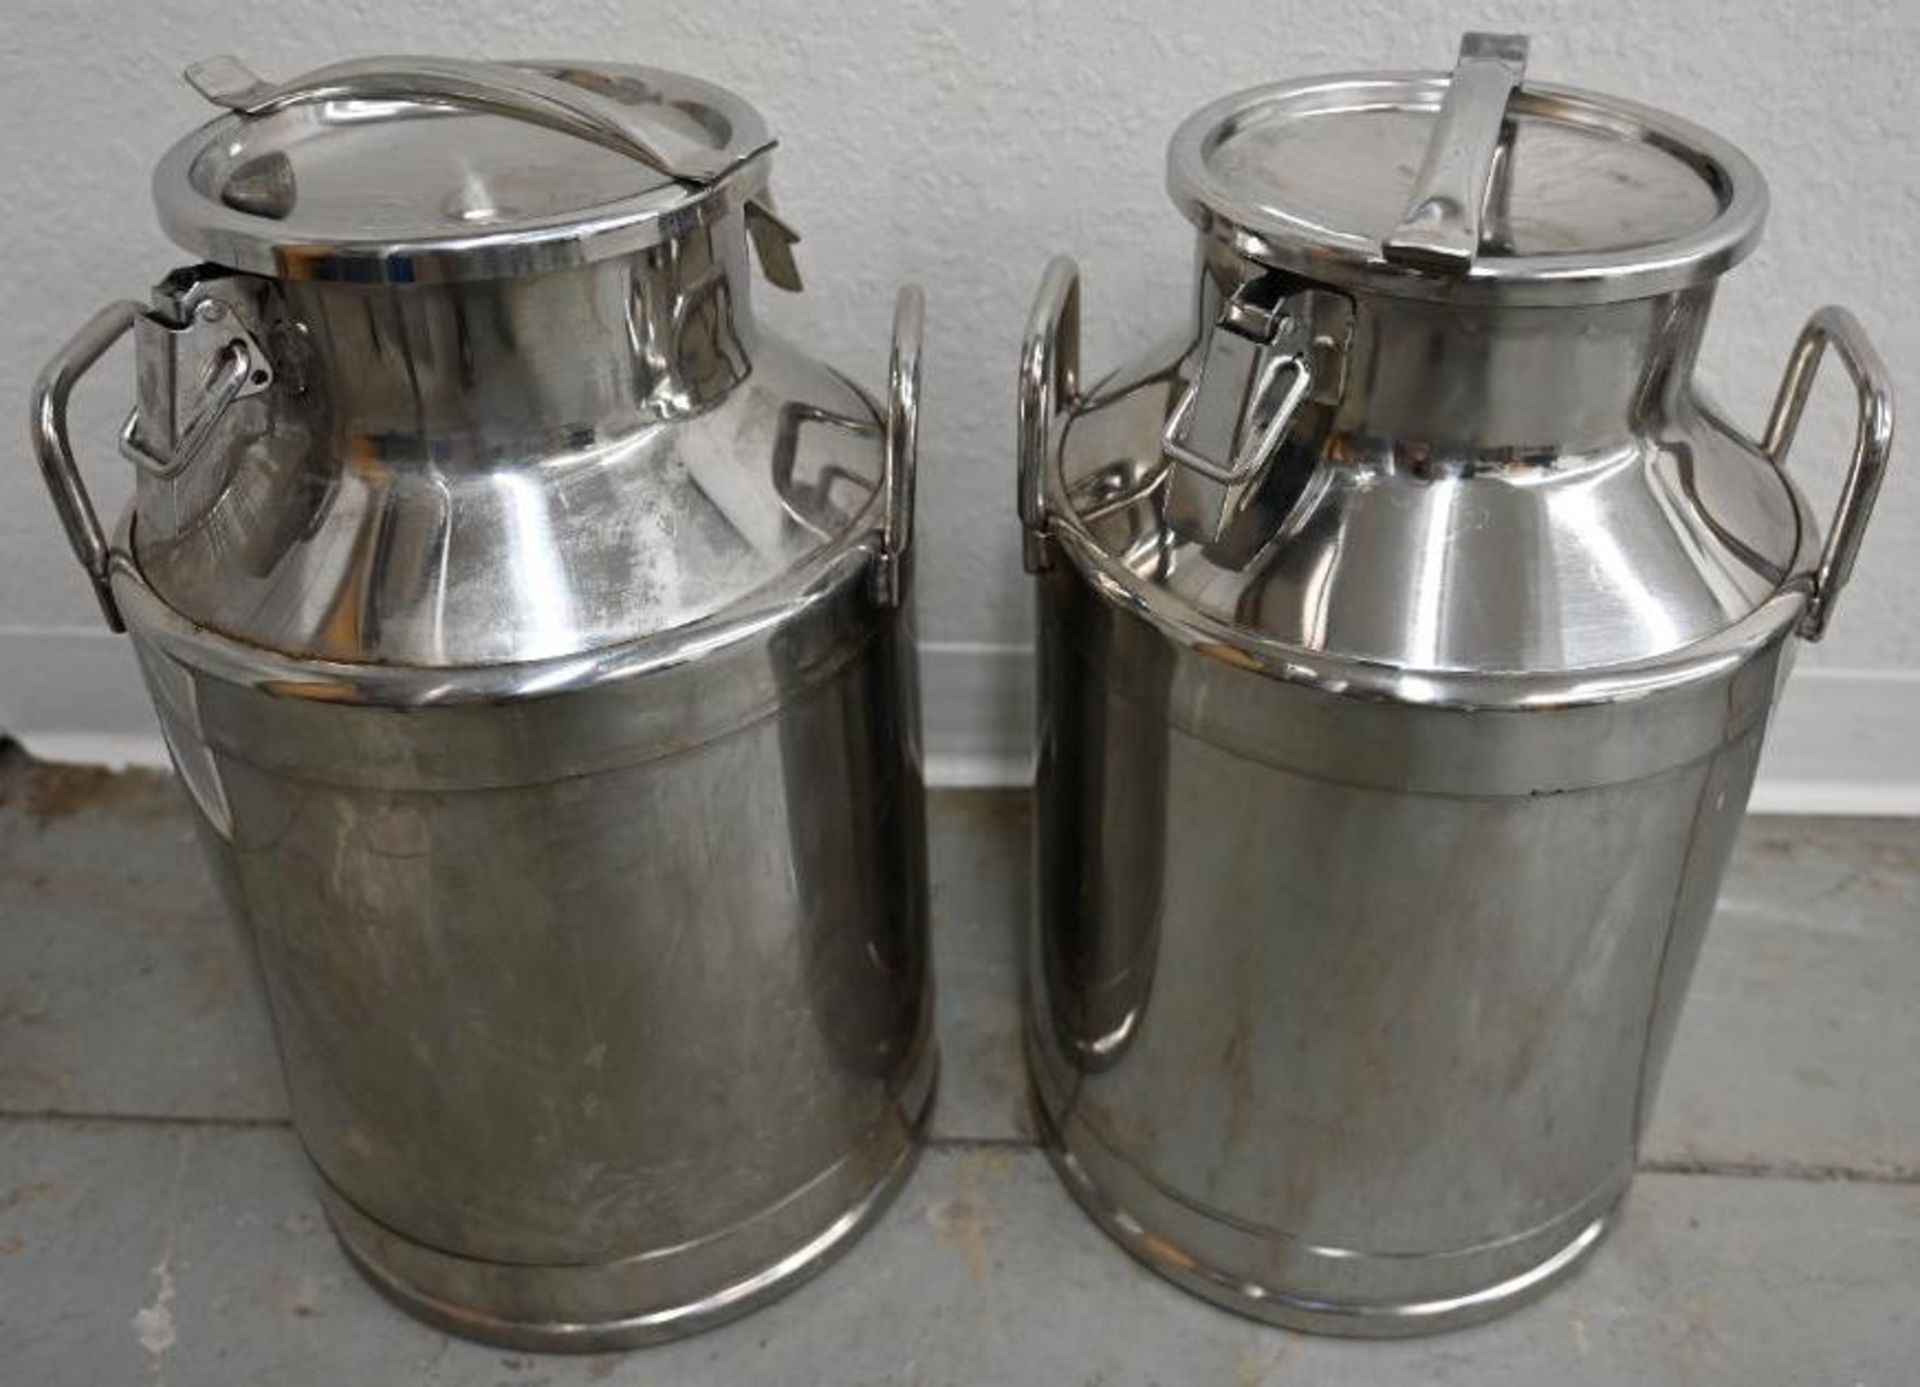 Two 12x12x21" Stainless Steel Milk Cans - Image 2 of 4